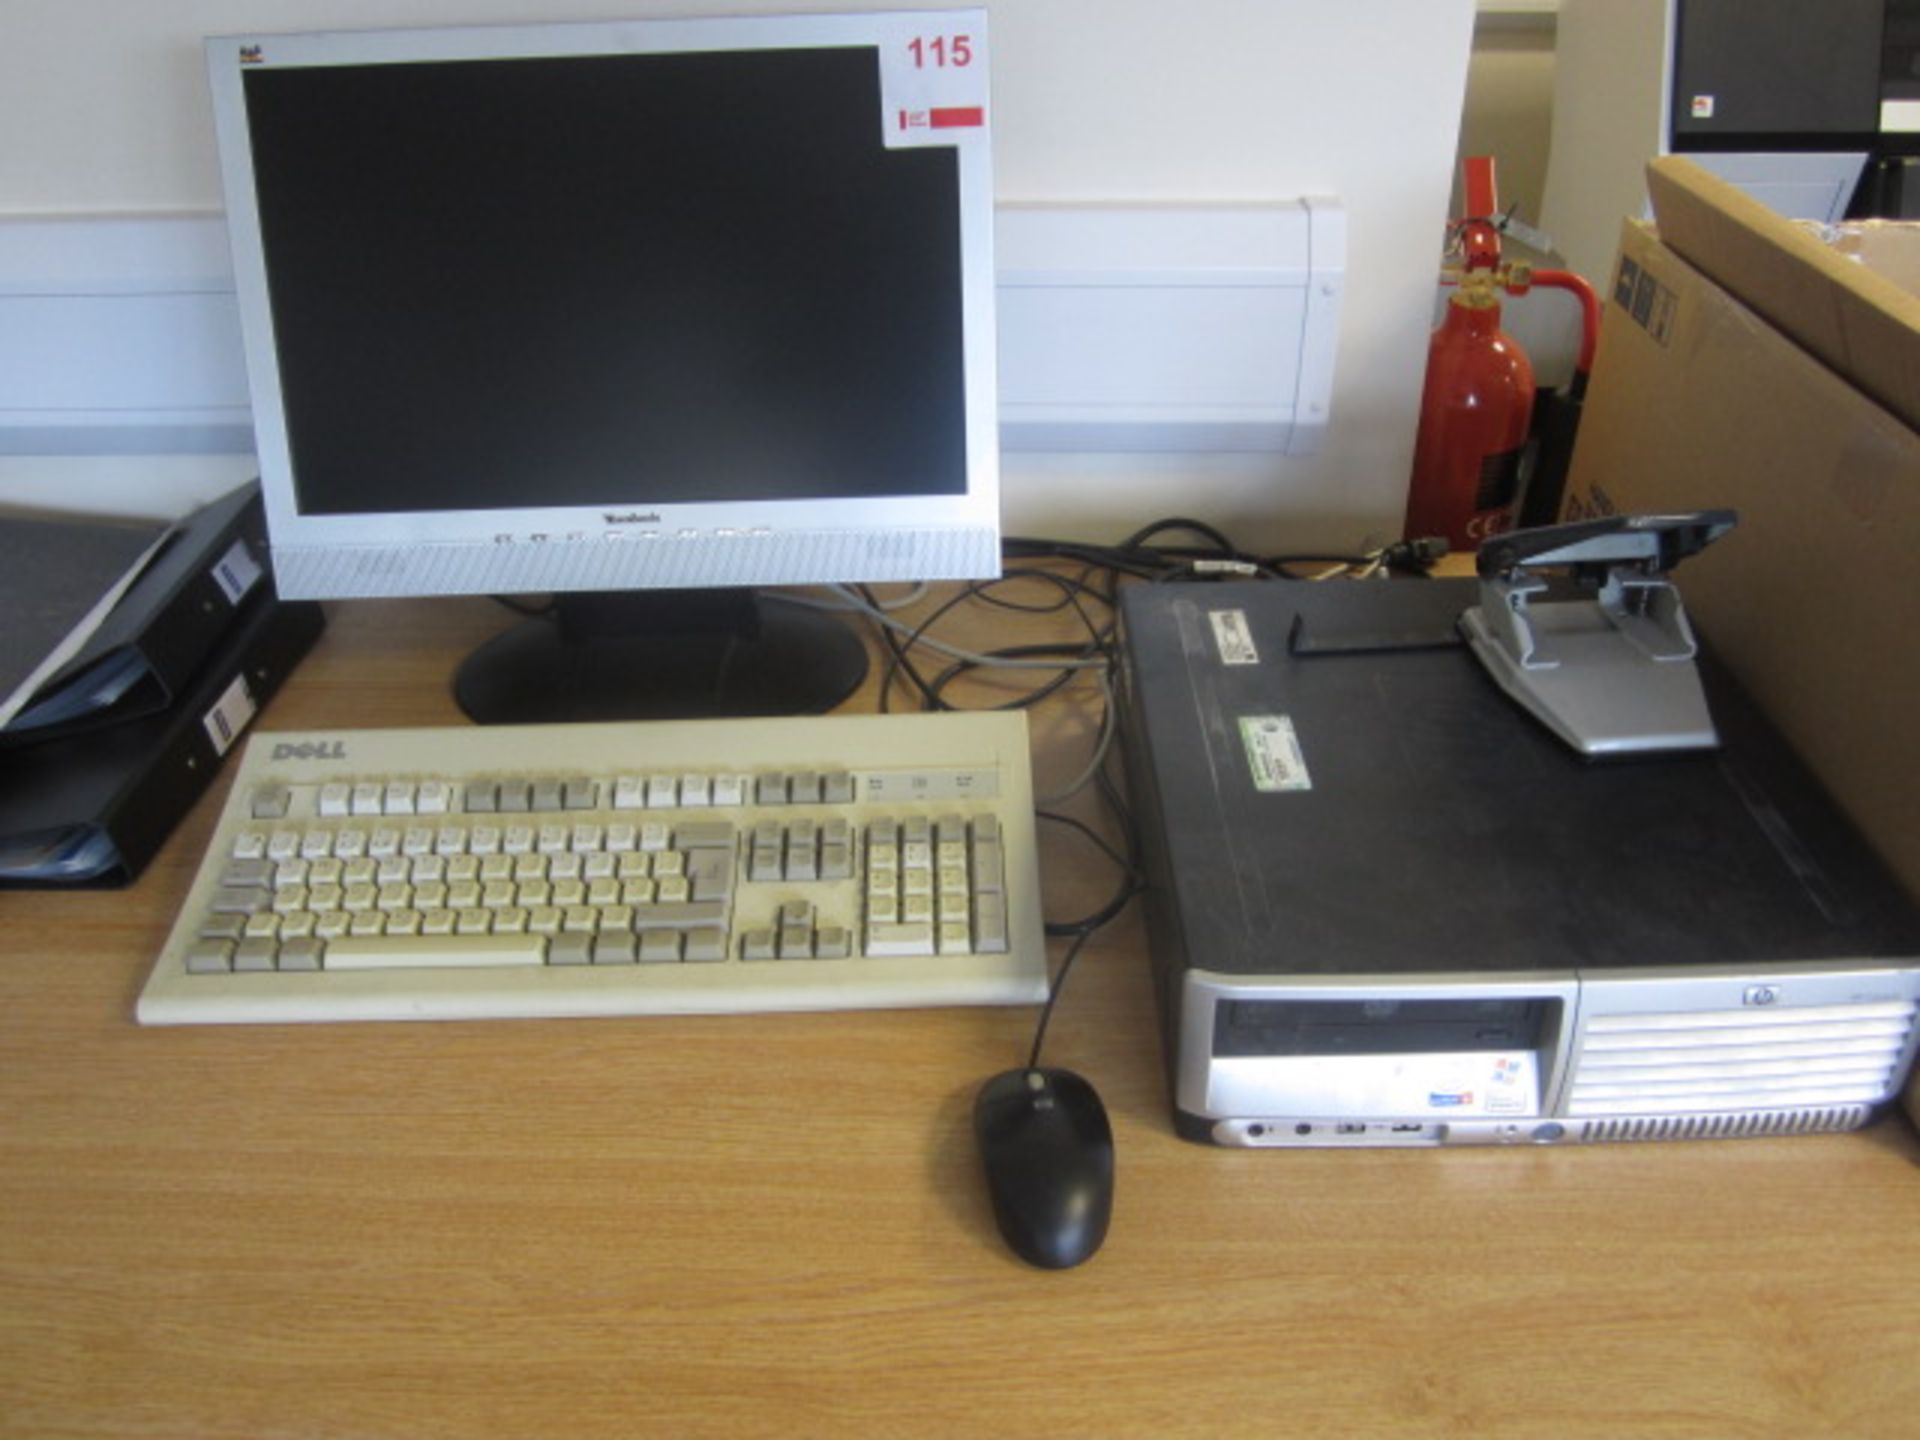 Acer Veriton and HP Compaq desktop PC's, flat screen monitor, keyboard, mouse